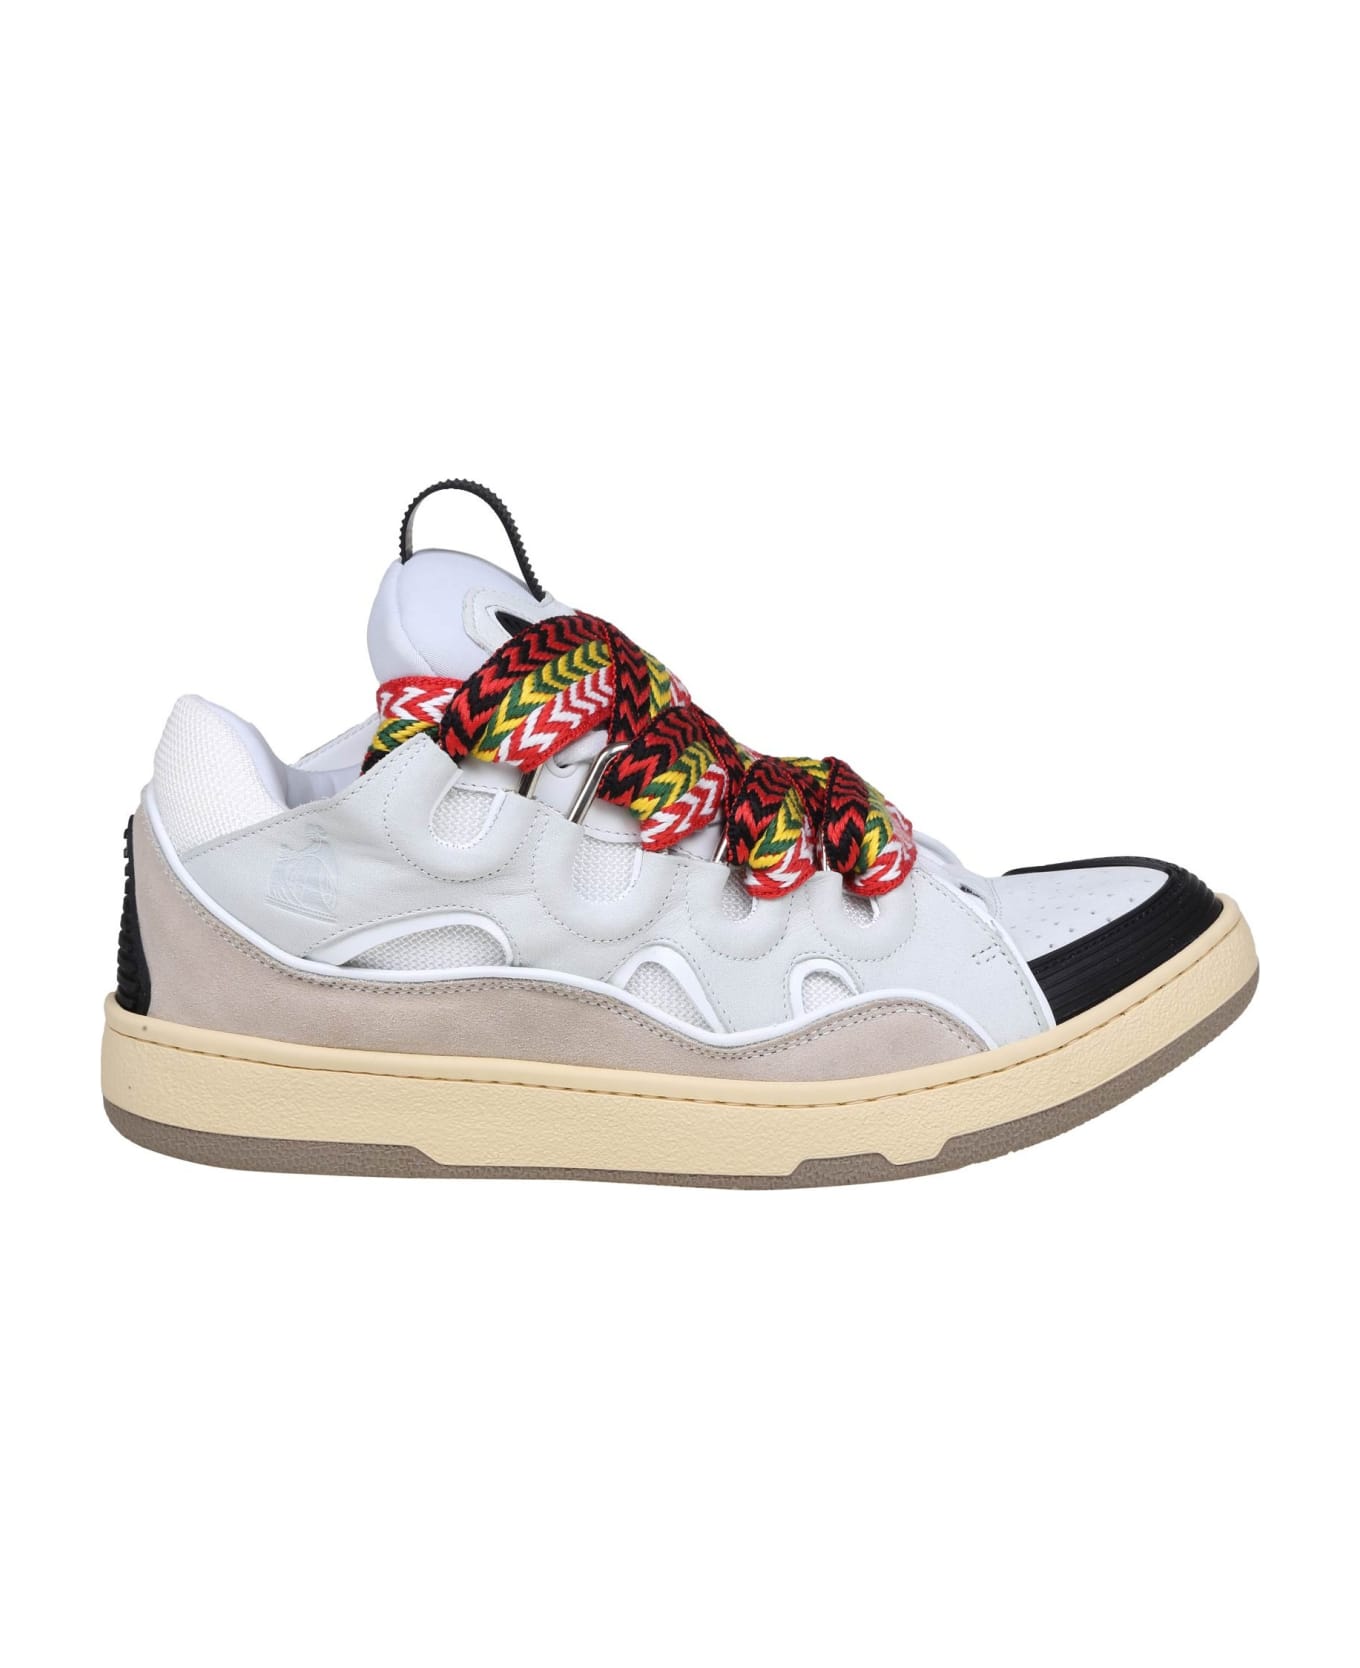 Lanvin Curb Sneakers In Leather And Suede With Multicolor Laces - White スニーカー